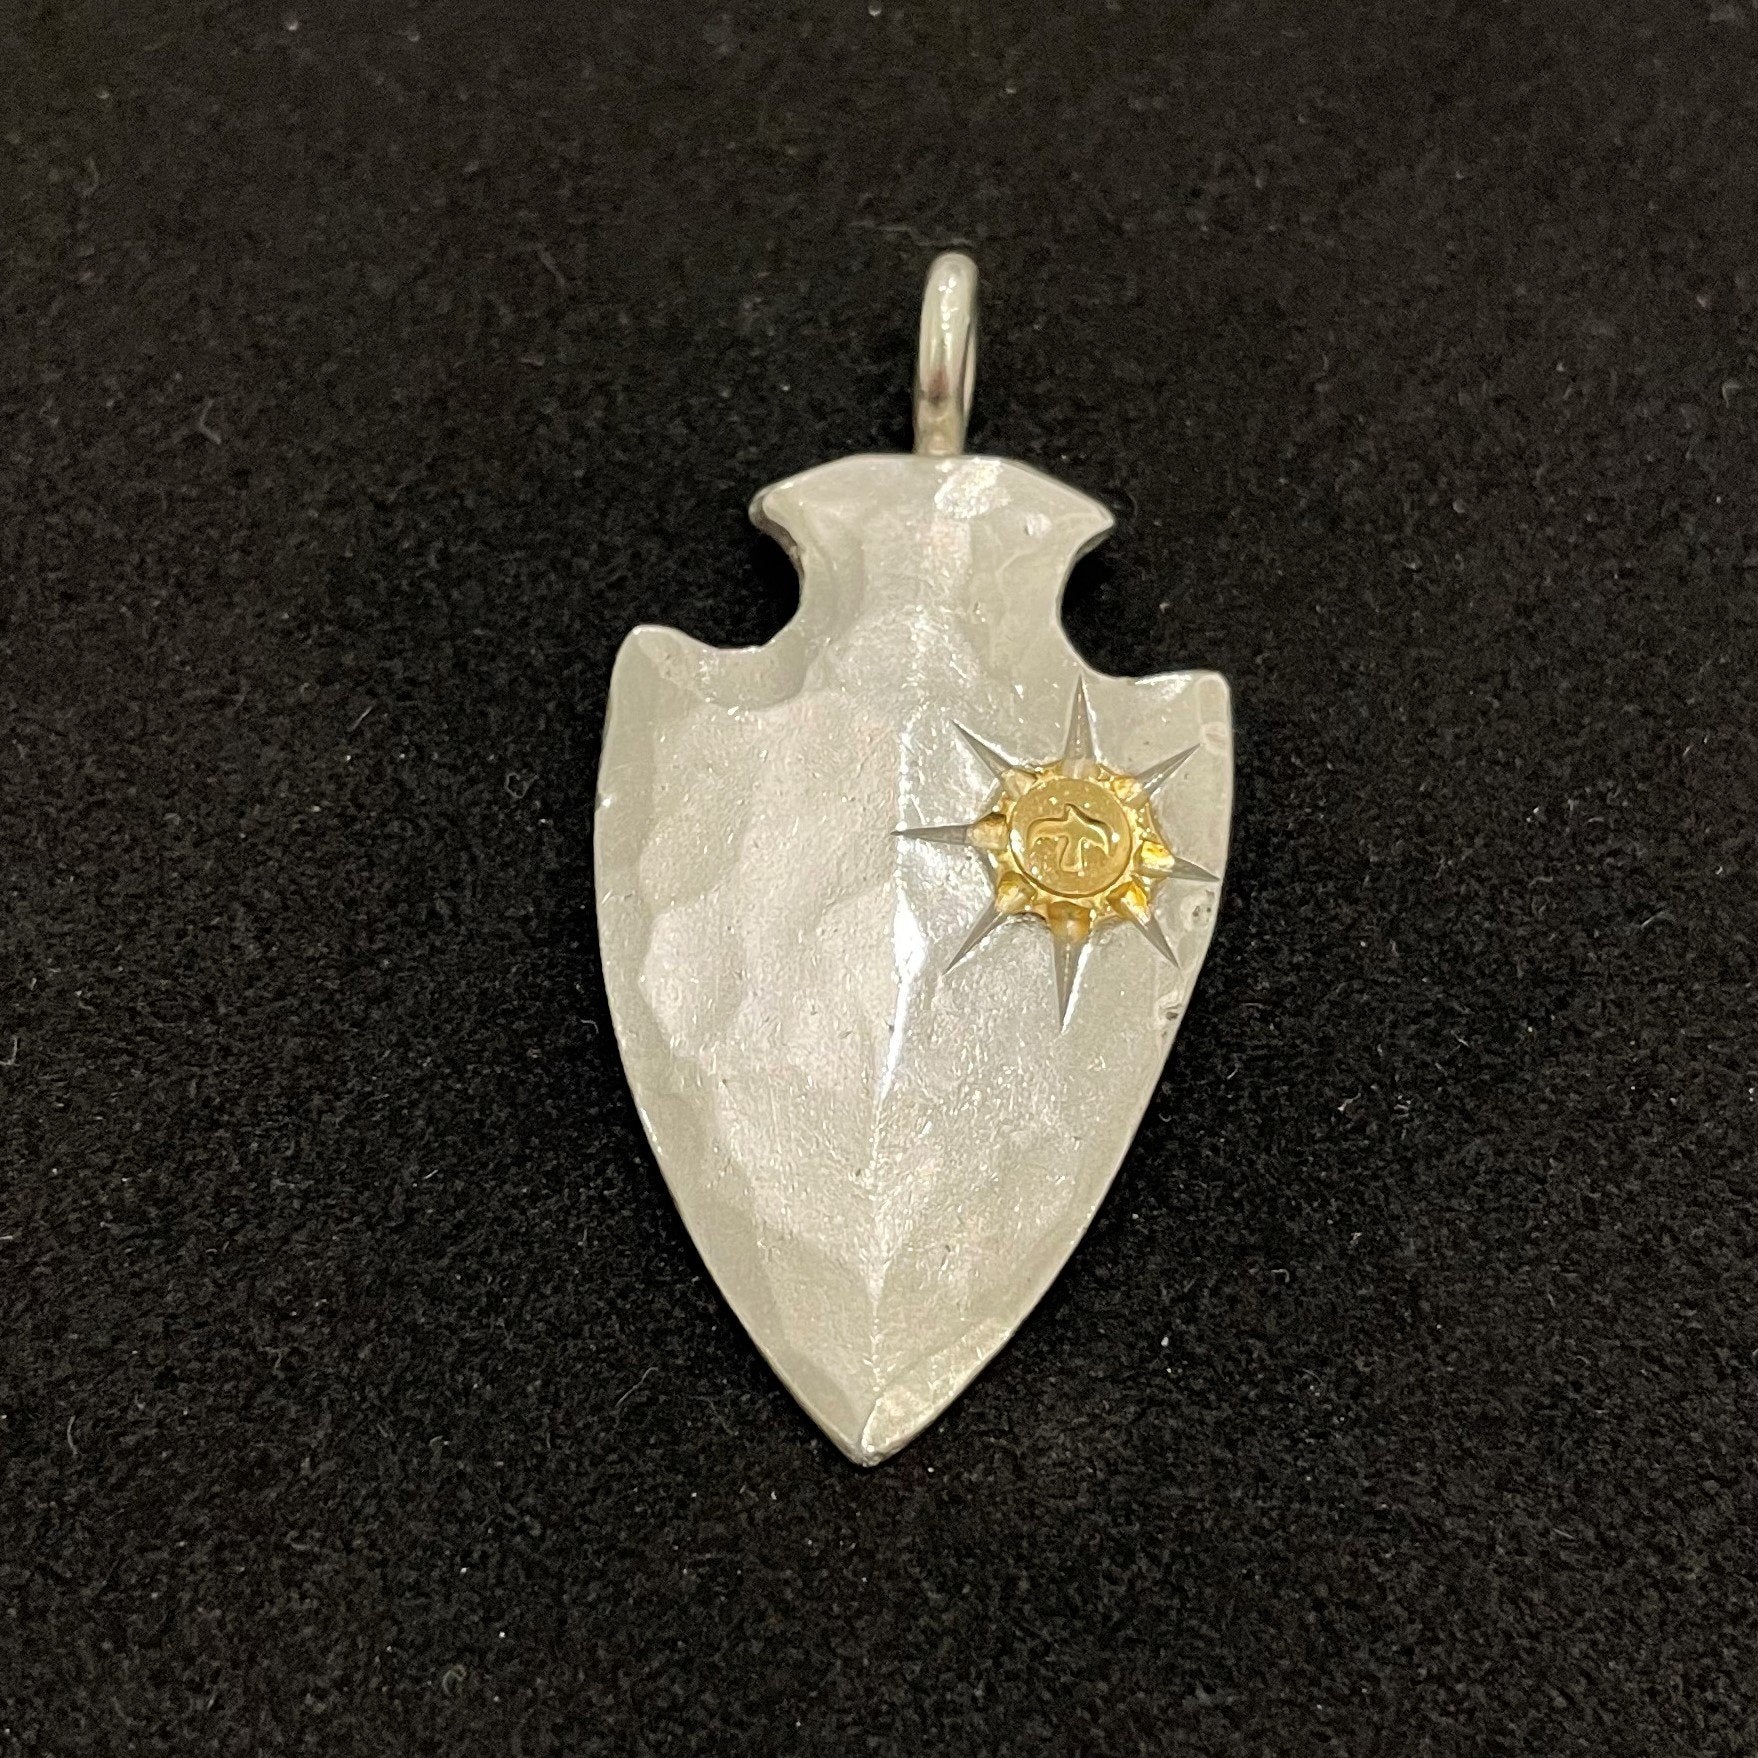 Arrowhead with K18 Gold-Metal on Side - Large | Goros Authorized Dealer